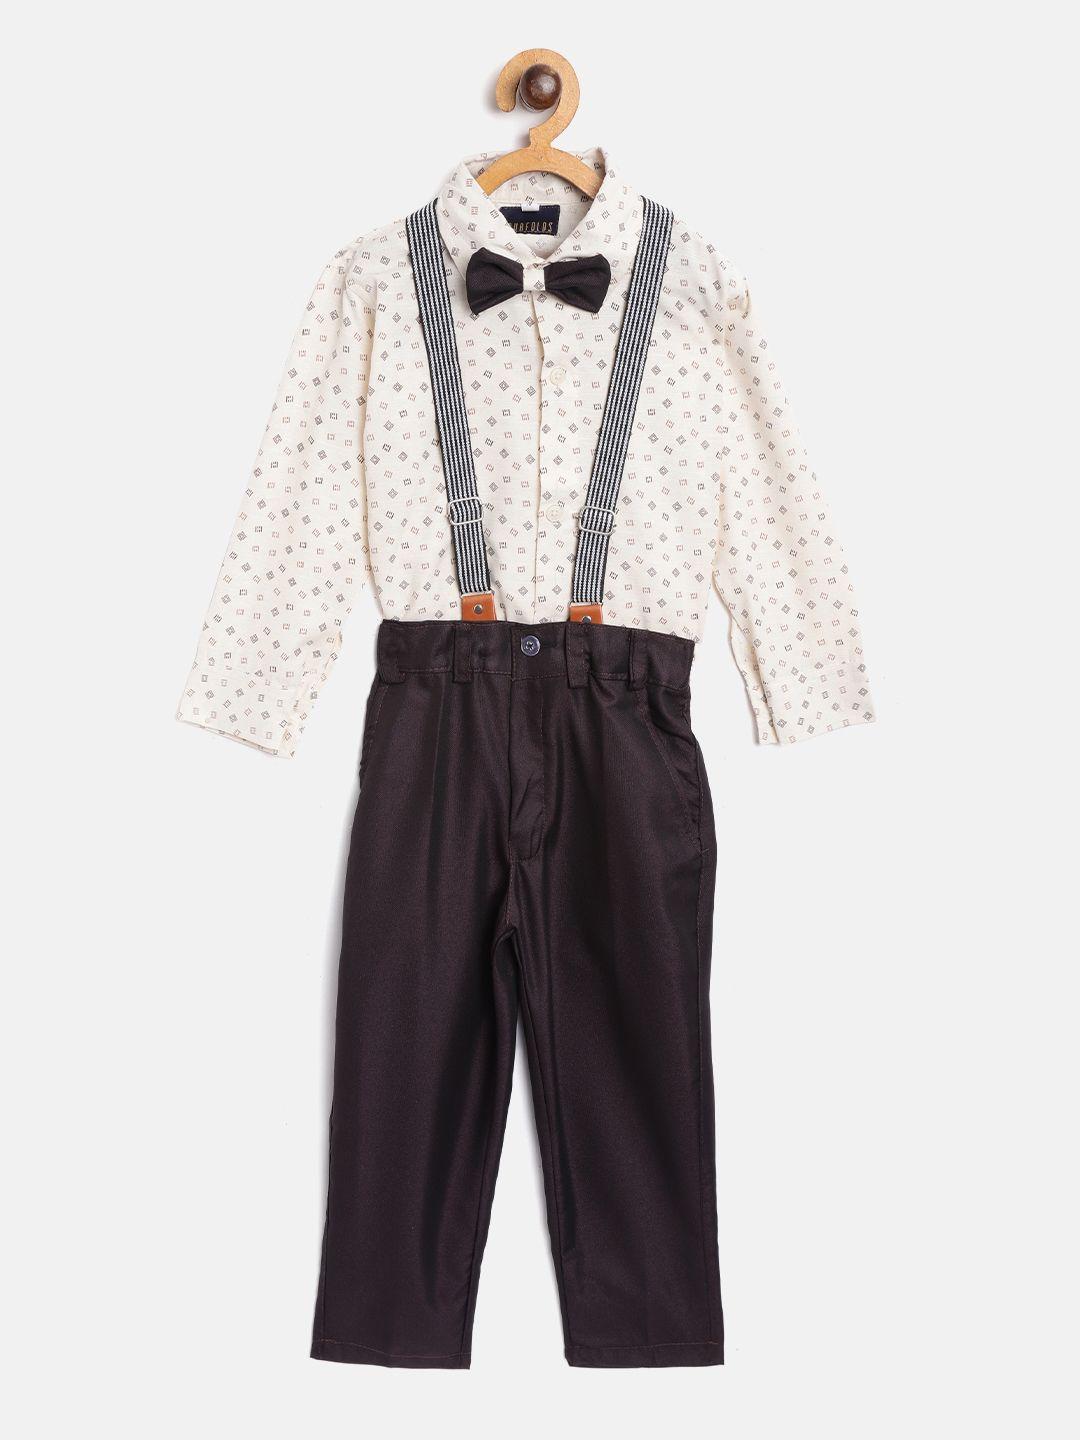 fourfolds-boys-off-white-&-coffee-brown-printed-clothing-set-with-suspenders-&-bow-tie